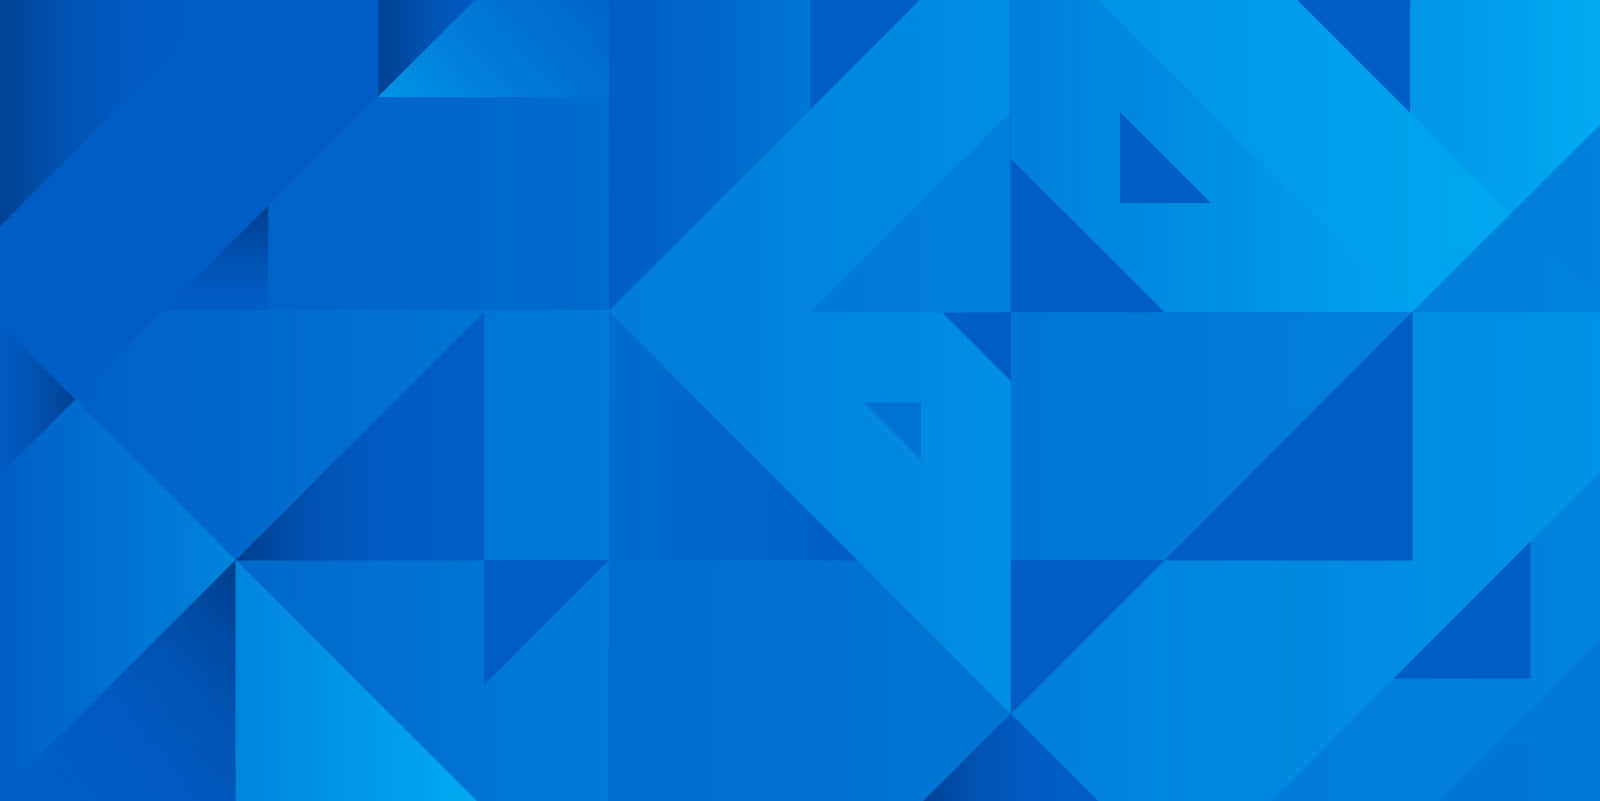 A Blue Background With Triangles On It